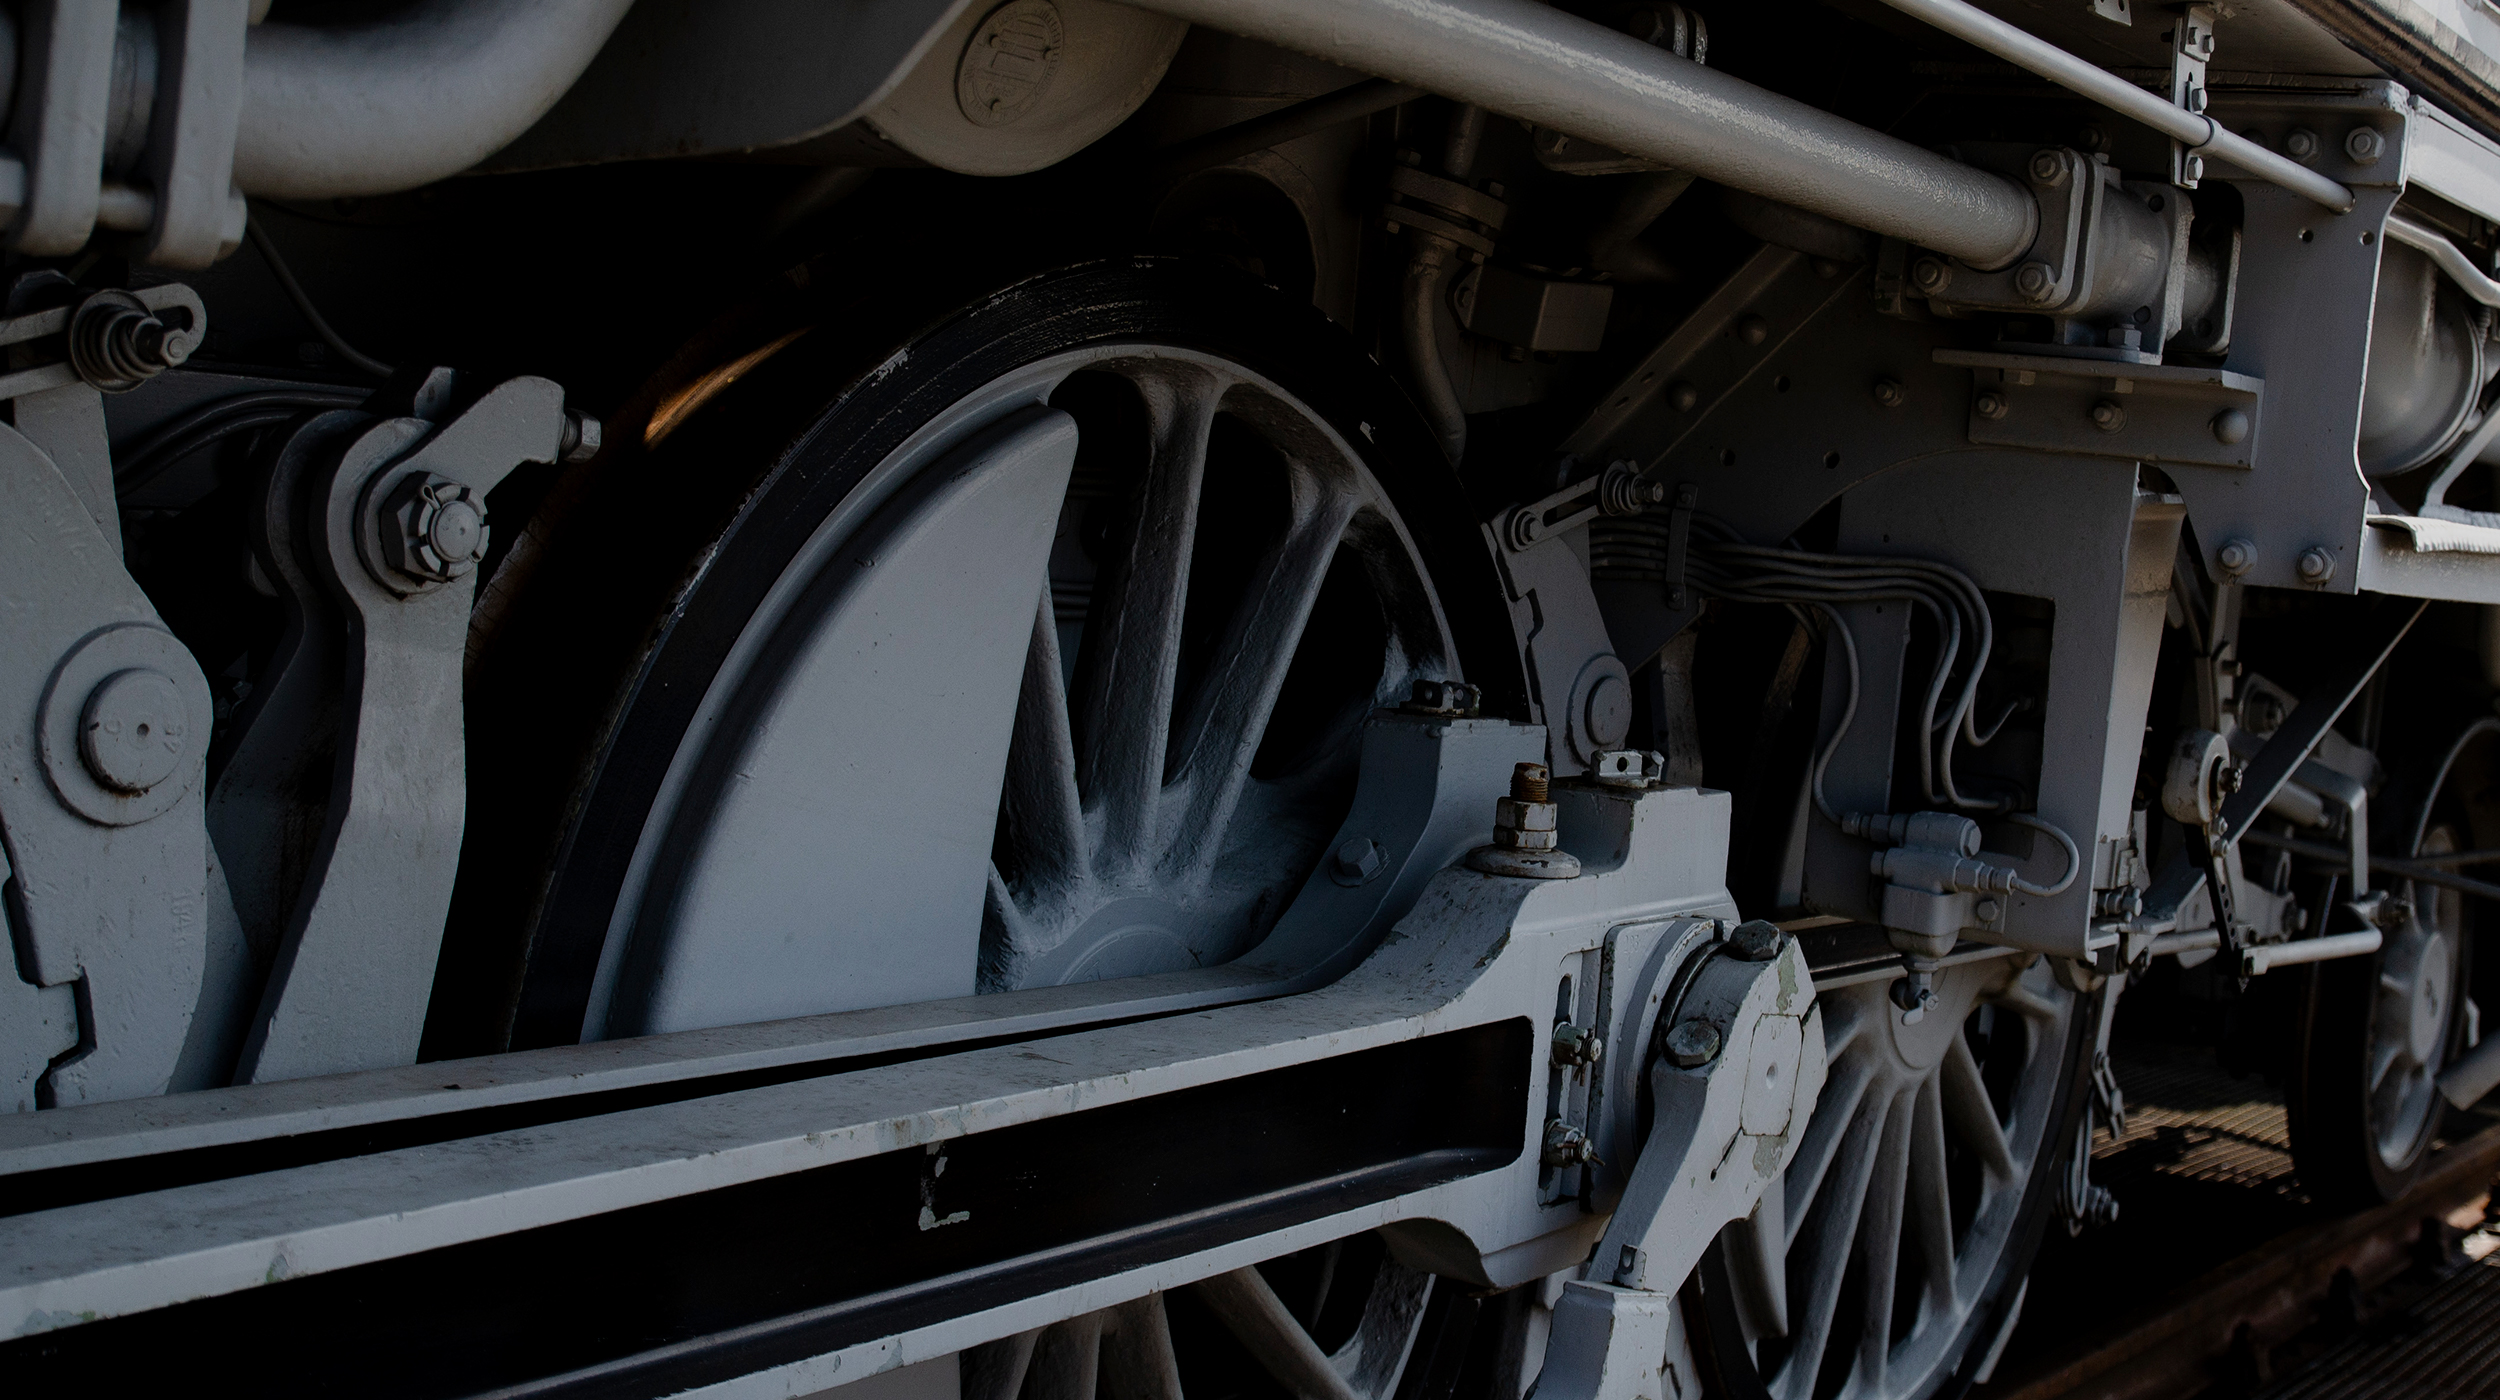 Close up of the trailing wheels of a locomotive